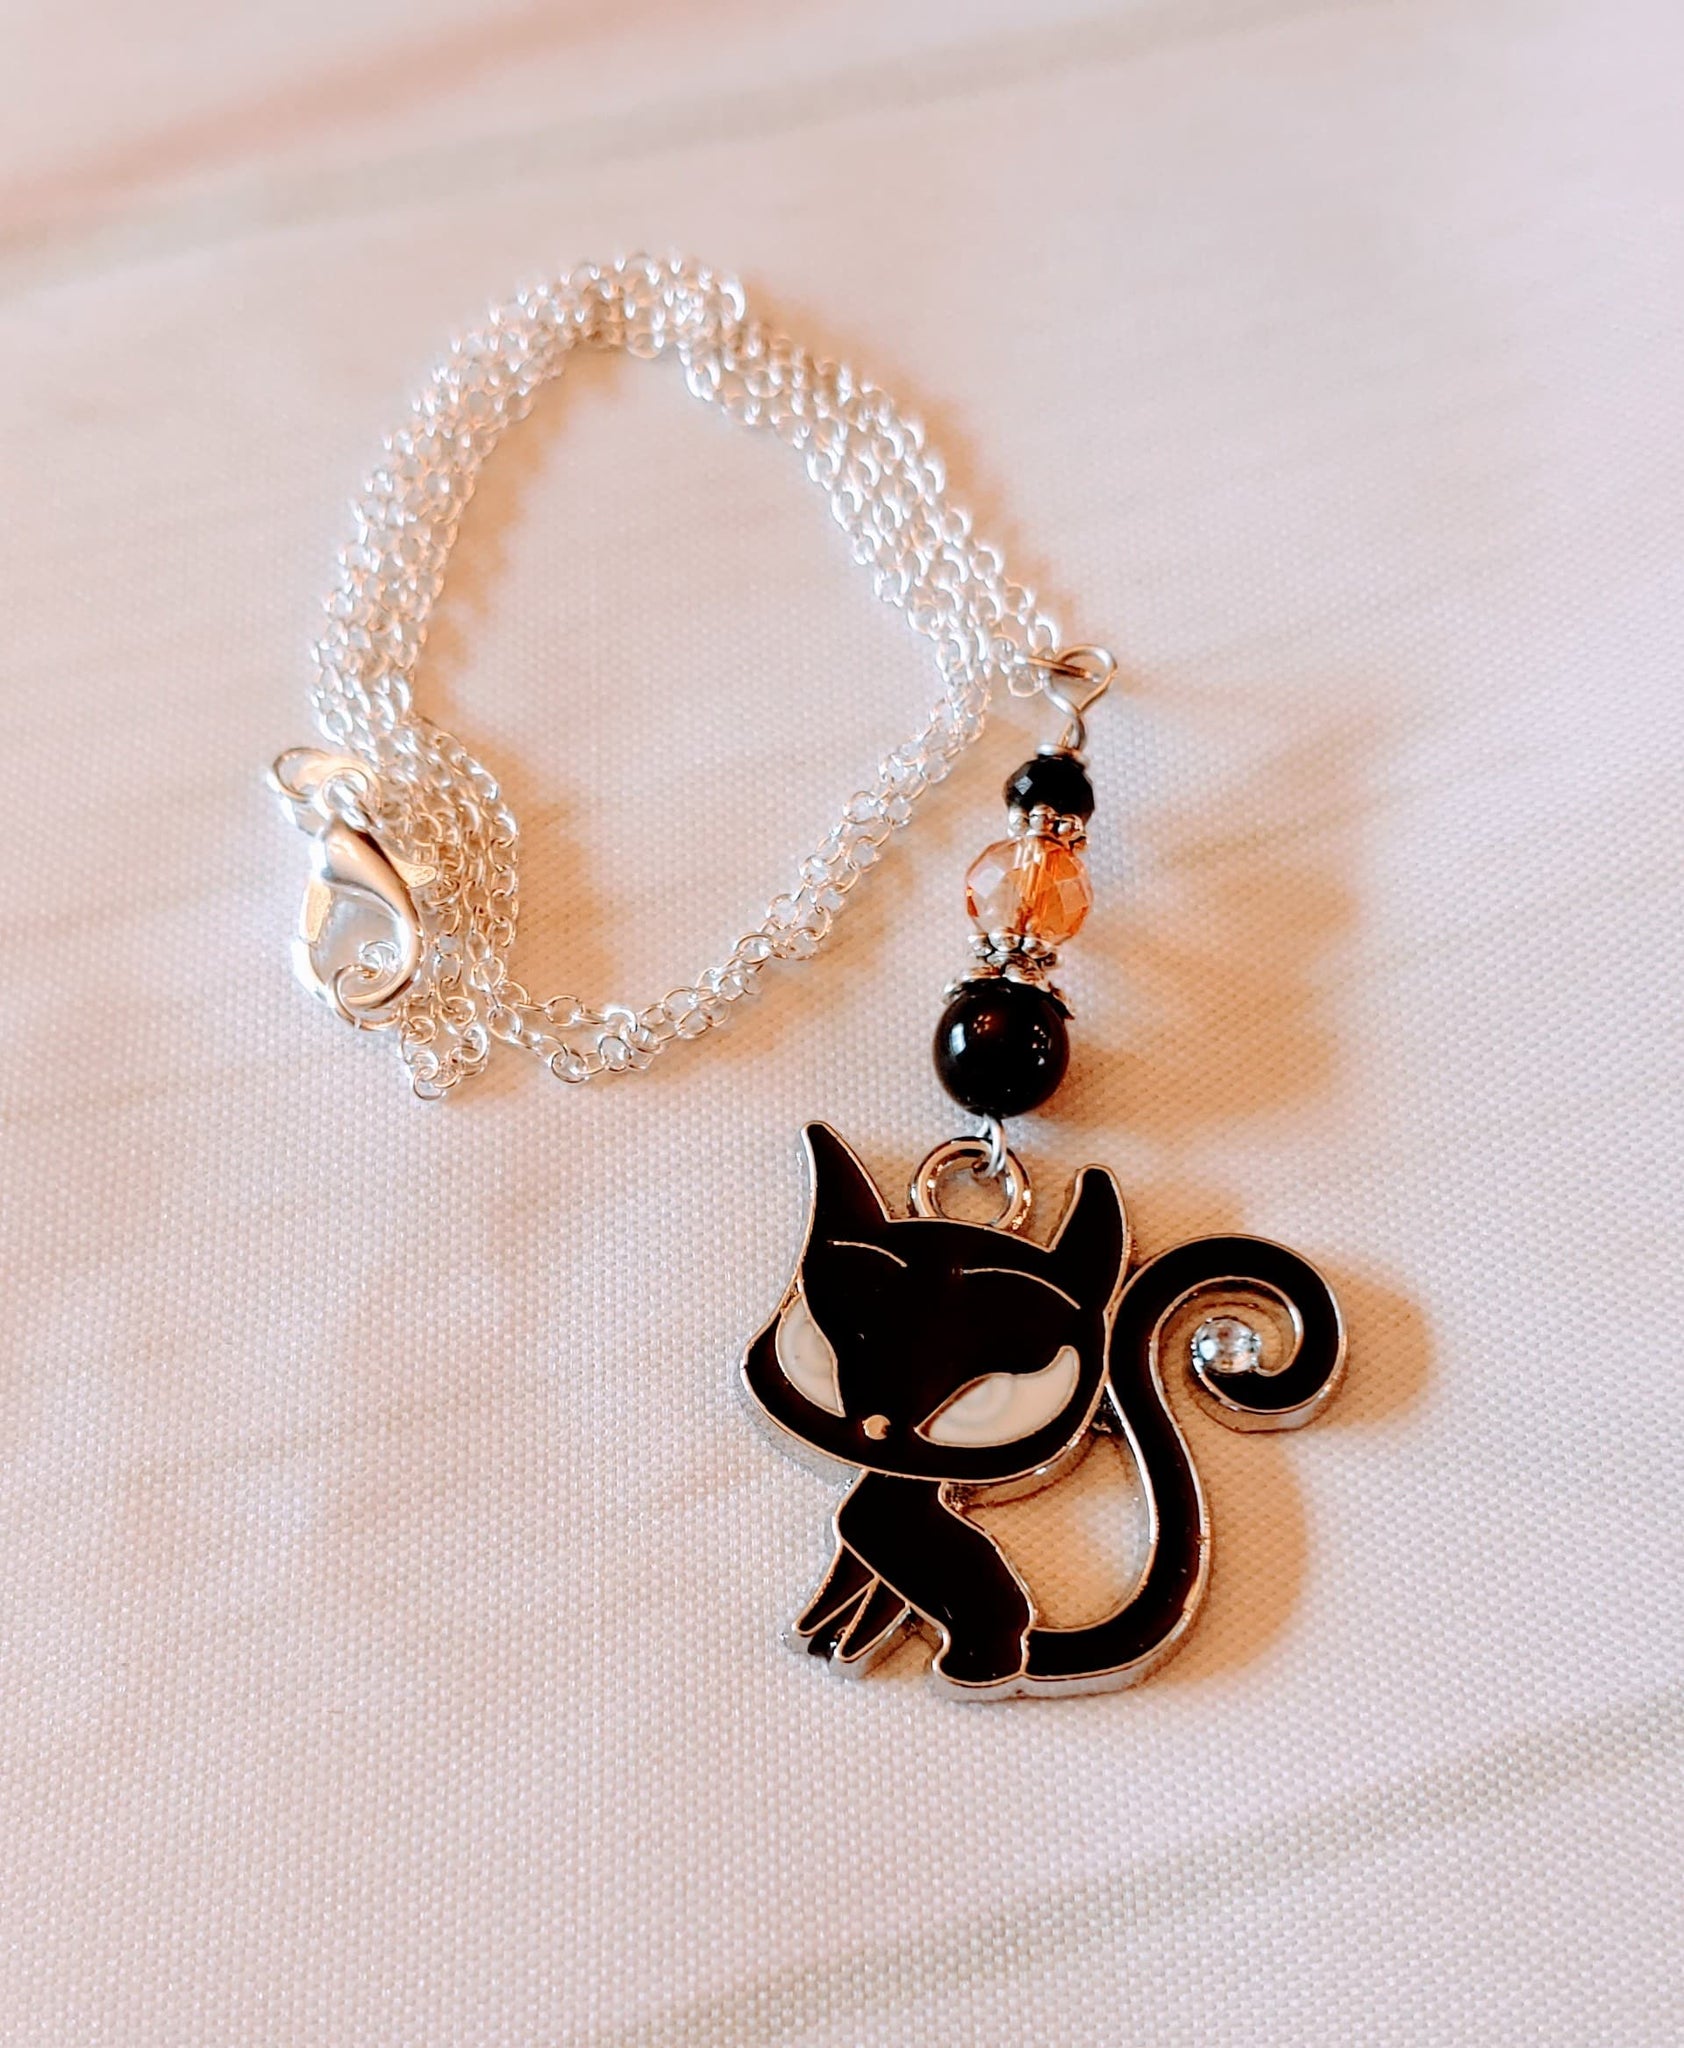 White / Black Cat Necklace, Gold / Silver Plated, Enamel Cat Pendant, Cat  Jewelry, Animal Necklace, Cat Lovers, Pet - Etsy